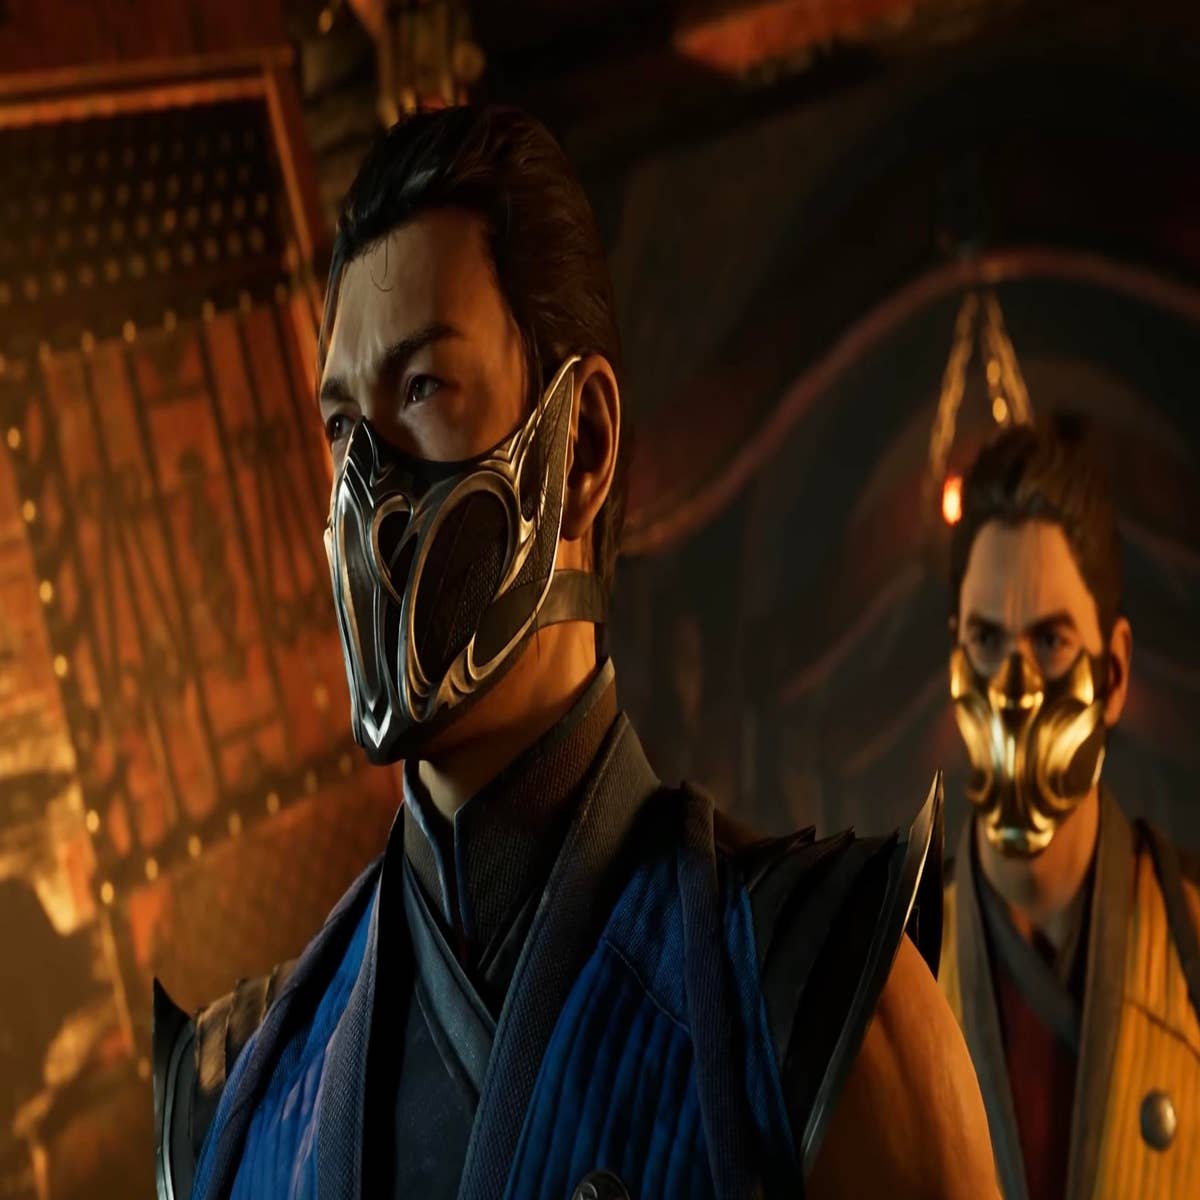 Here's Where You've Seen The Cast Of Mortal Kombat Before